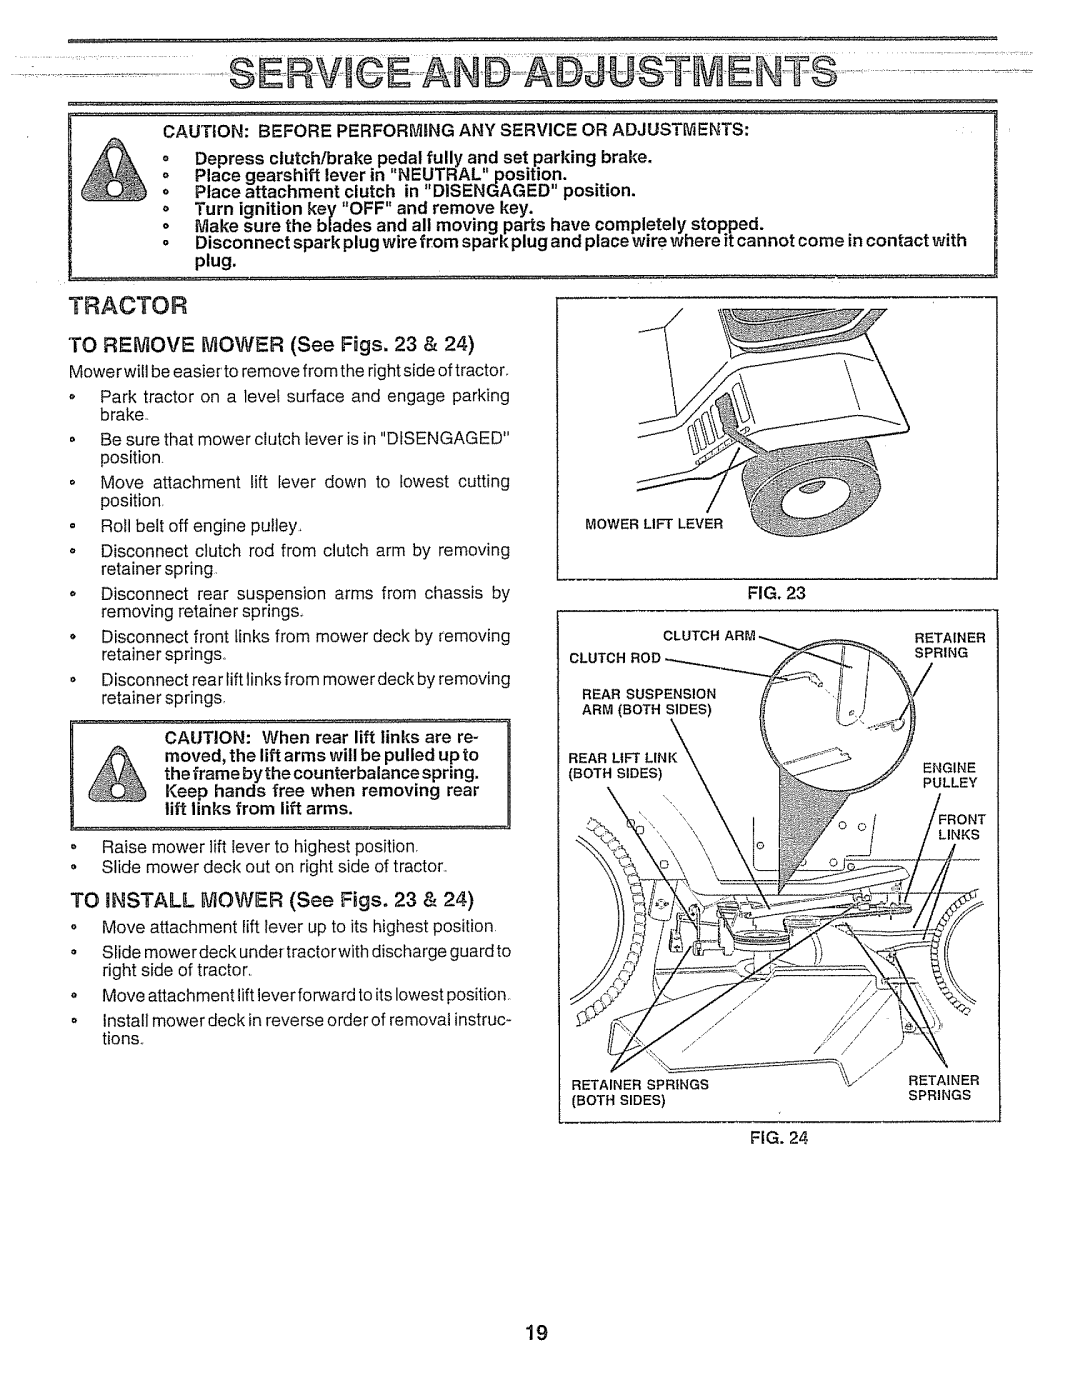 Craftsman 917.25693 owner manual Tractor, TO REMOVE MOWER See Figs. 23, TO INSTALL MOWER See Figs. 23 